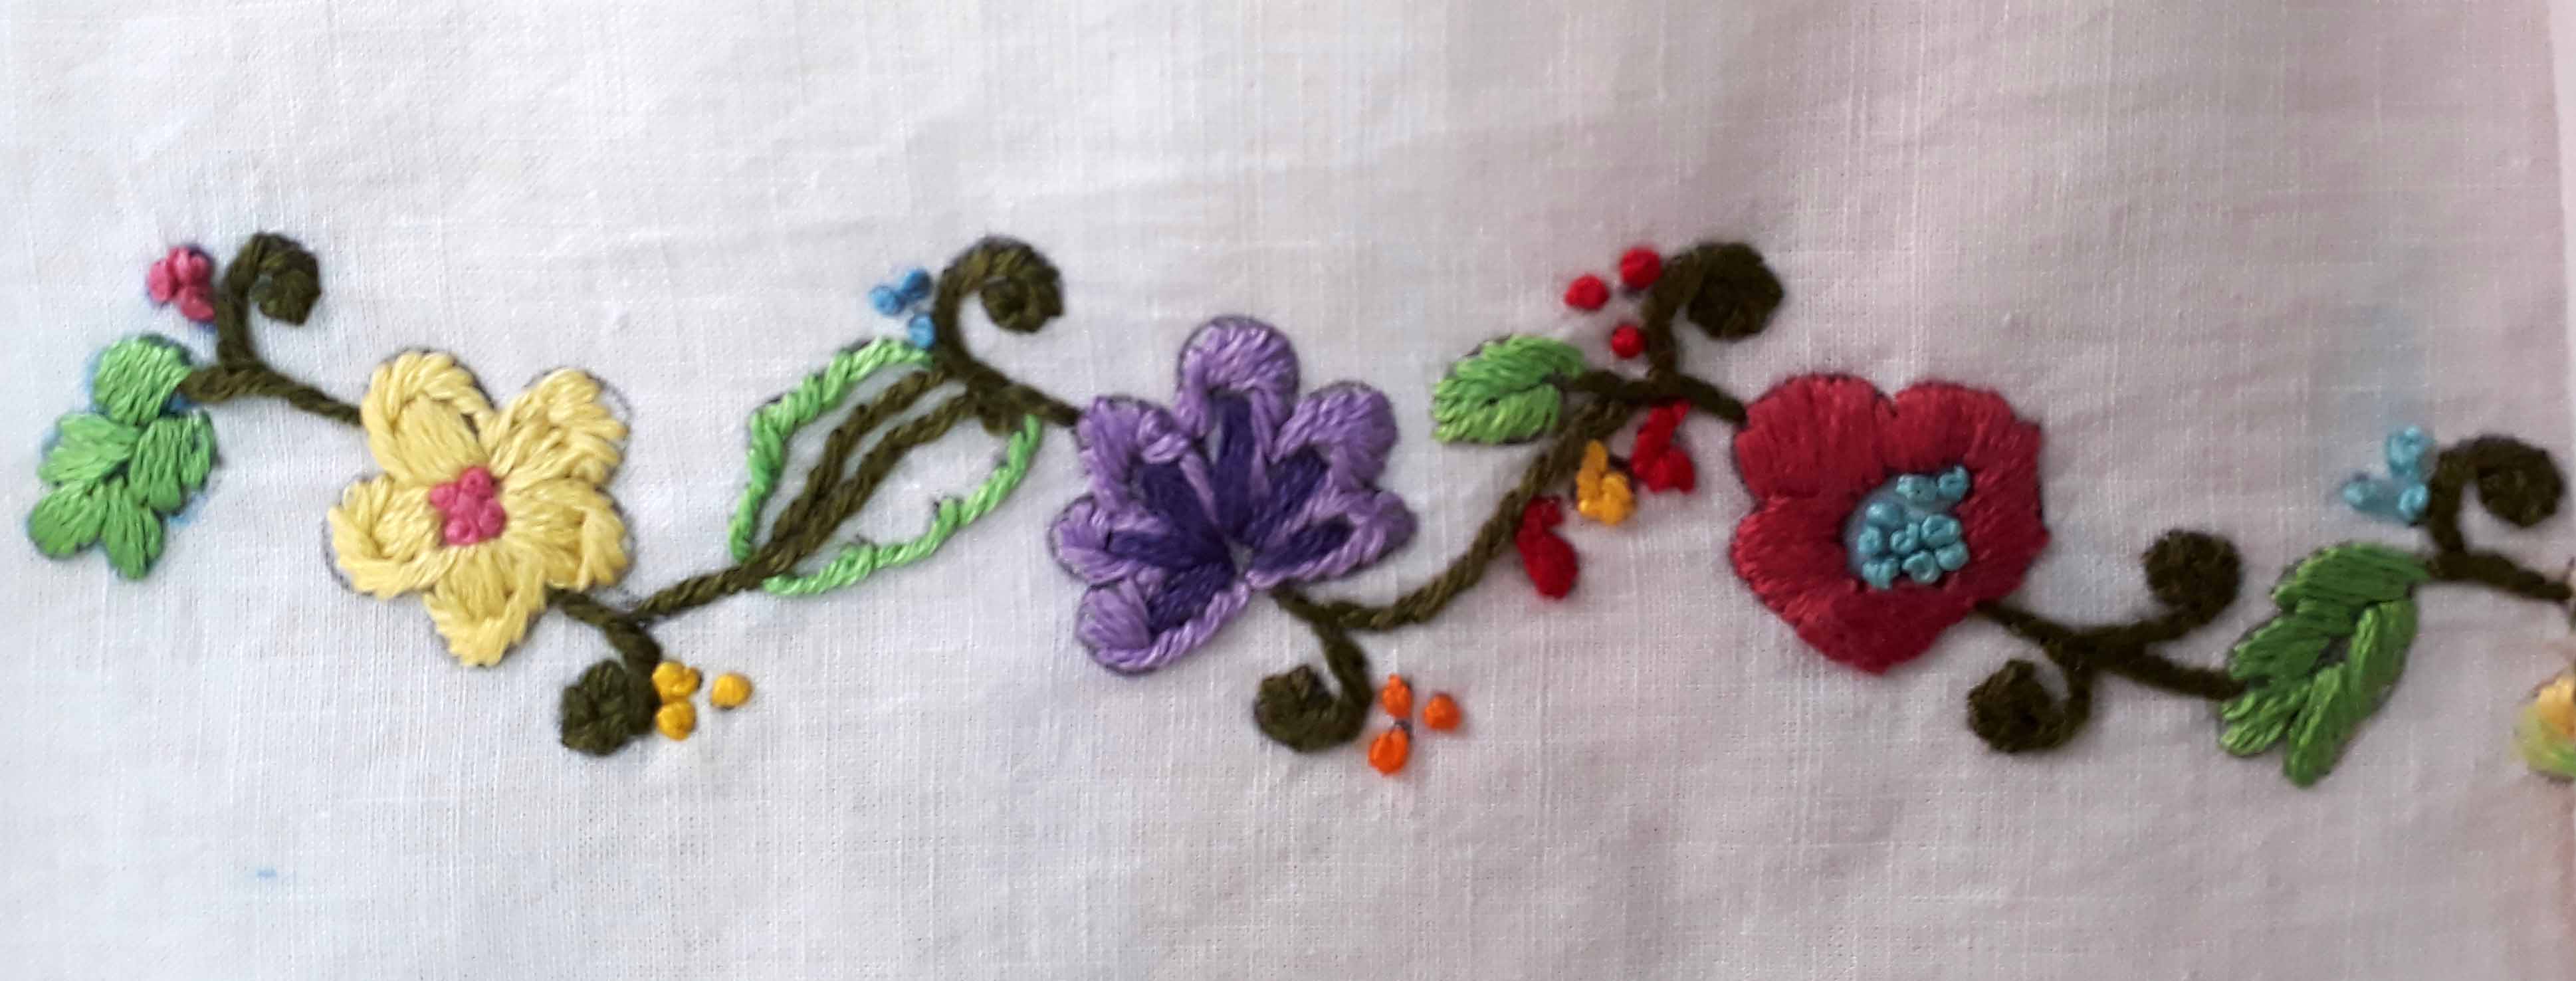 Embroidery by our students